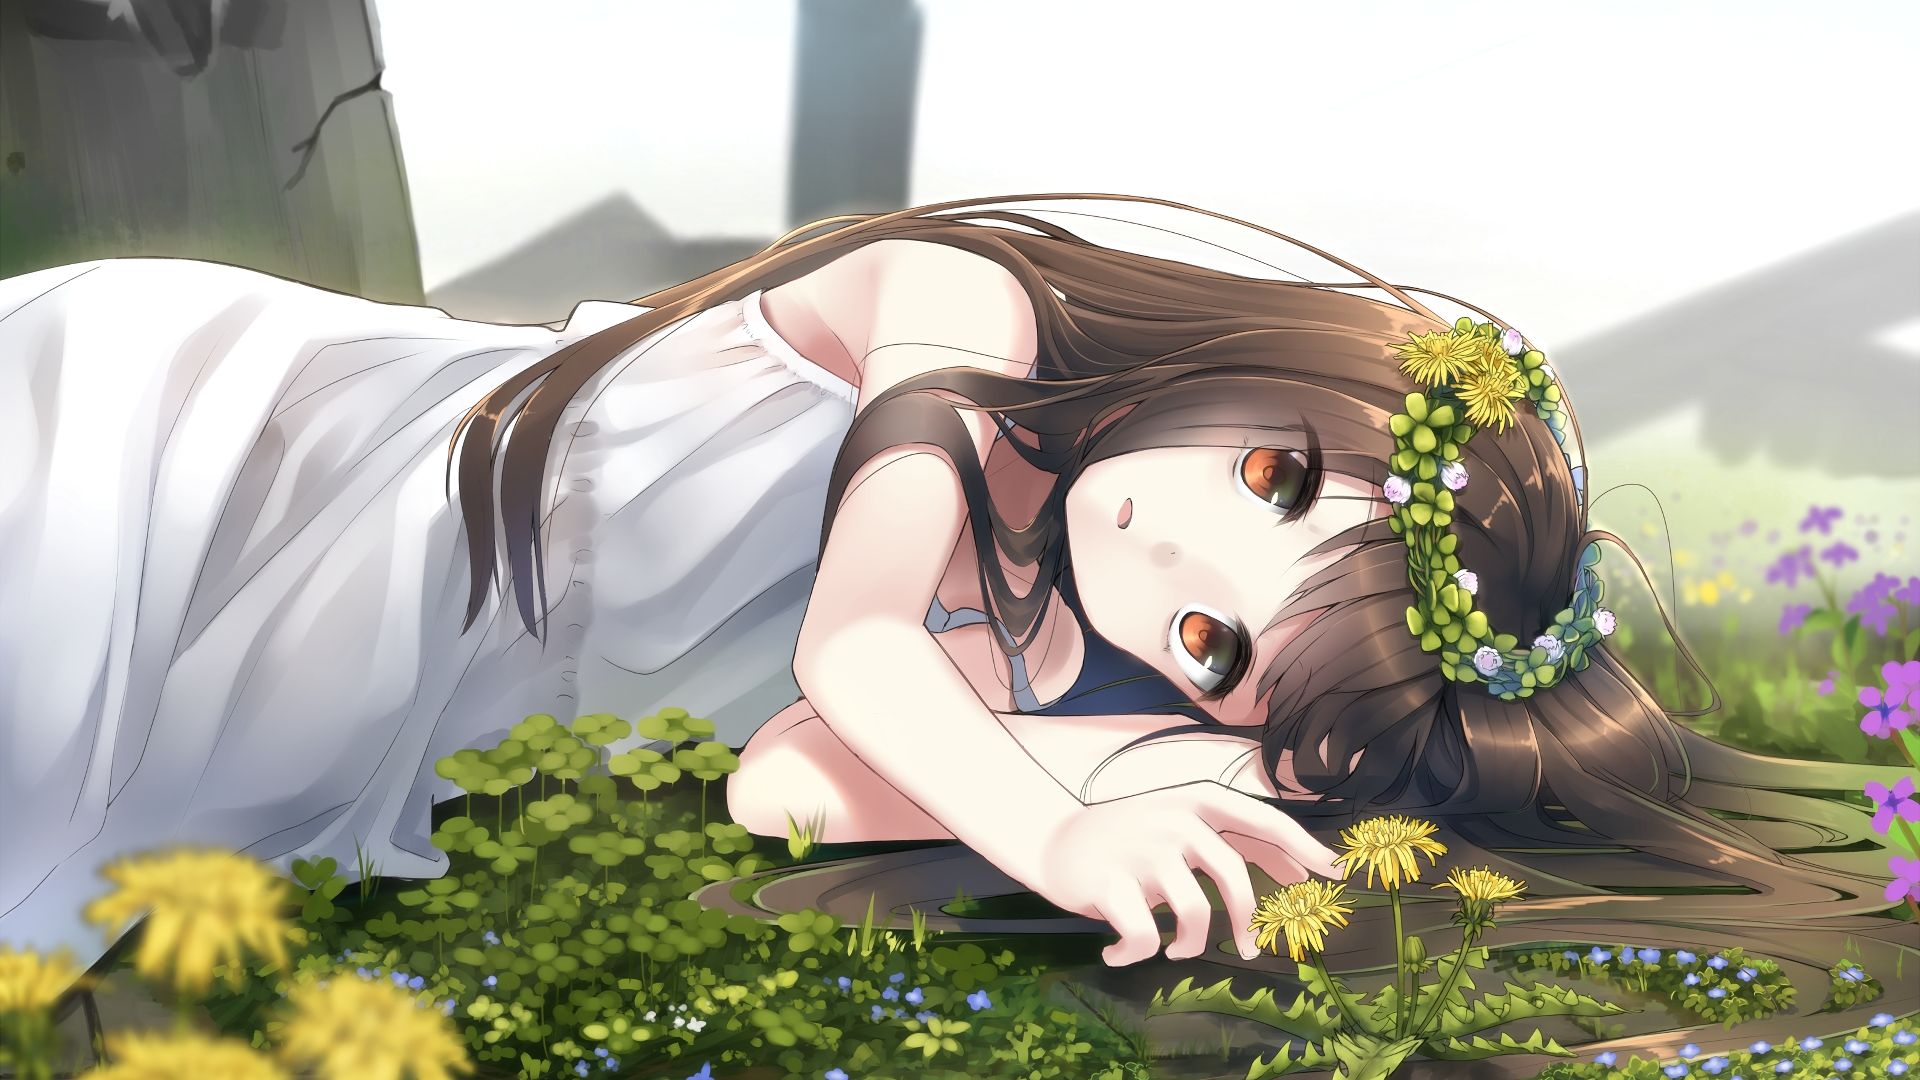 Wallpaper lying down and relaxed, anime girl, original, grassland desktop  wallpaper, hd image, picture, background, 488f12 | wallpapersmug